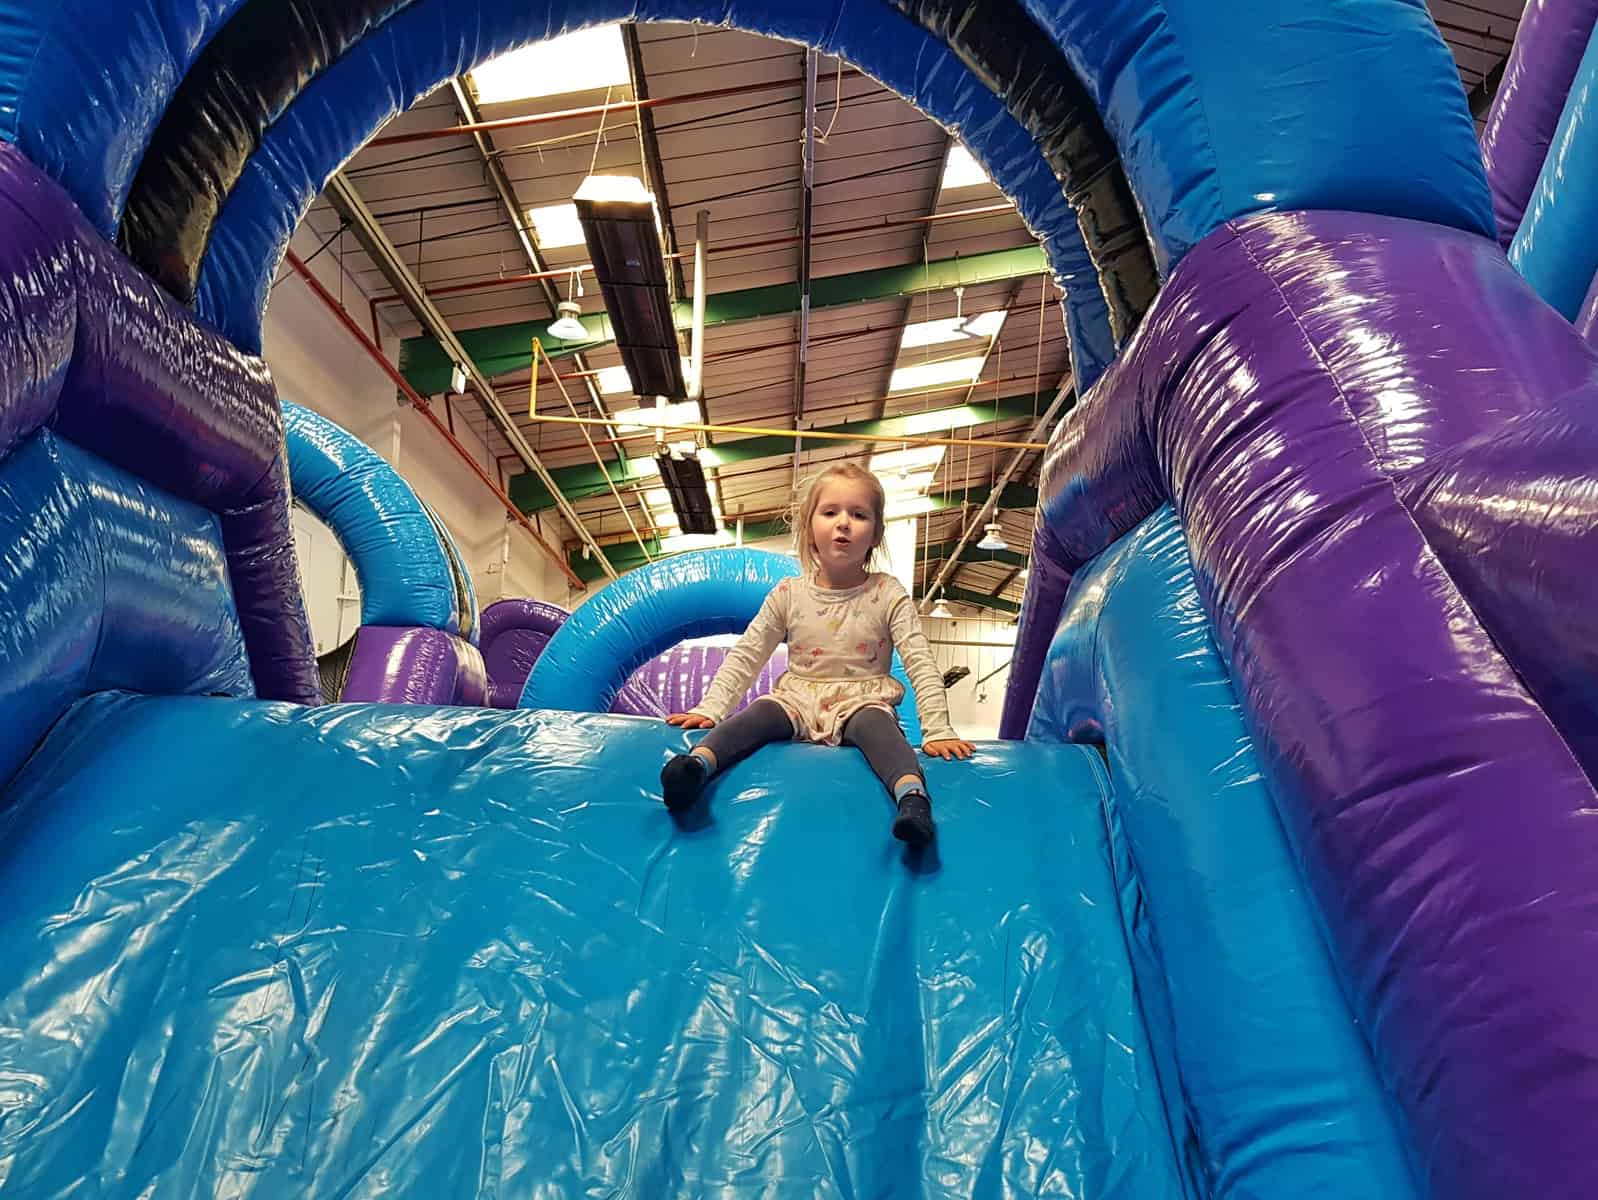 Inflata Nation Birmingham review and tips for visiting